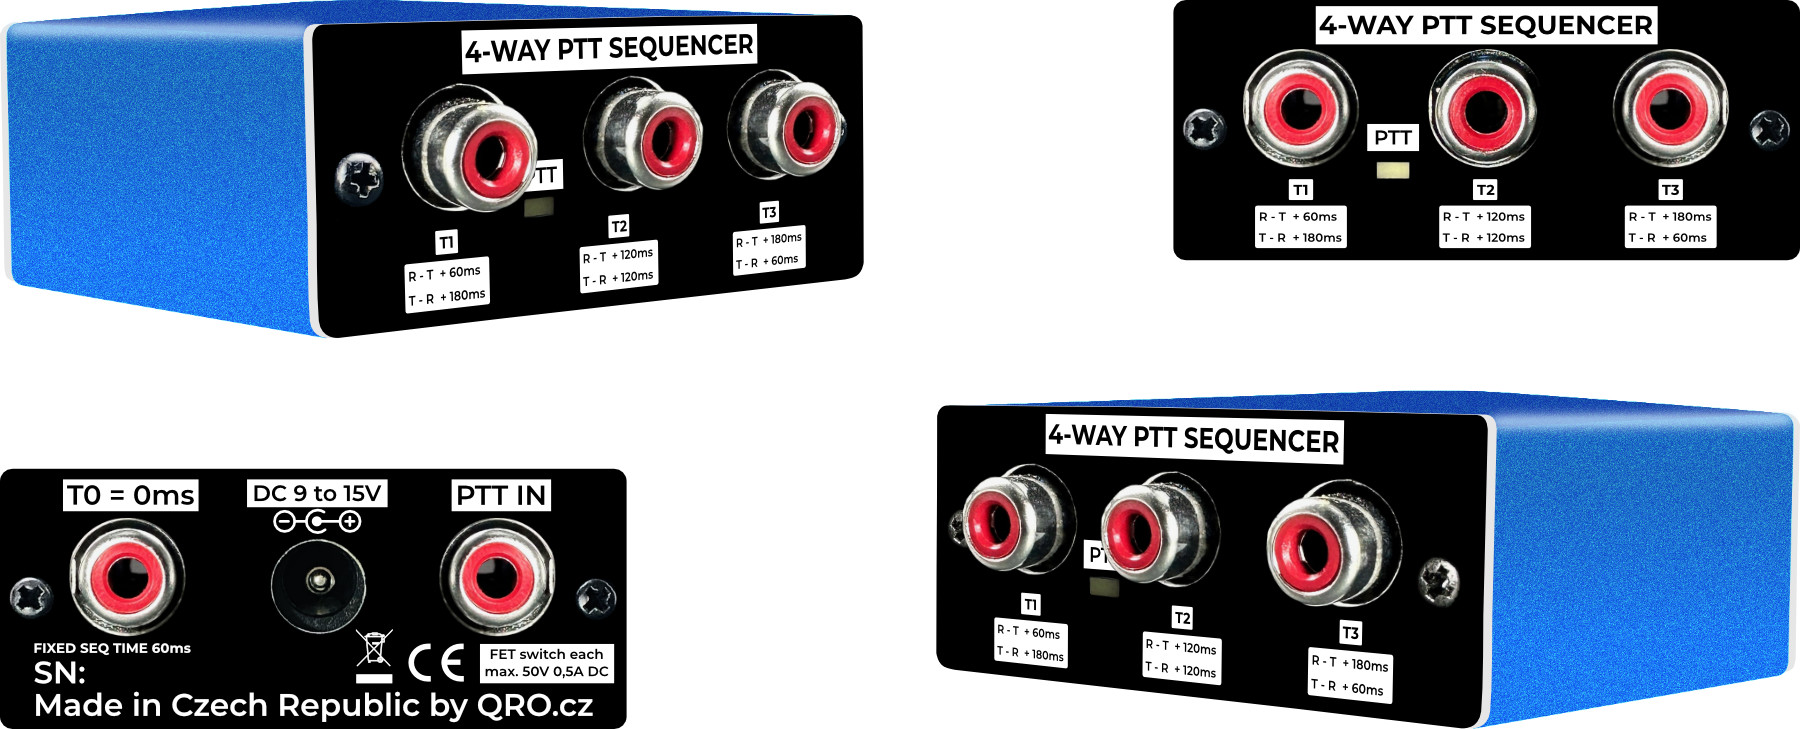 4-way ptt sequencer in box assembled qro.cz hamparts.shop